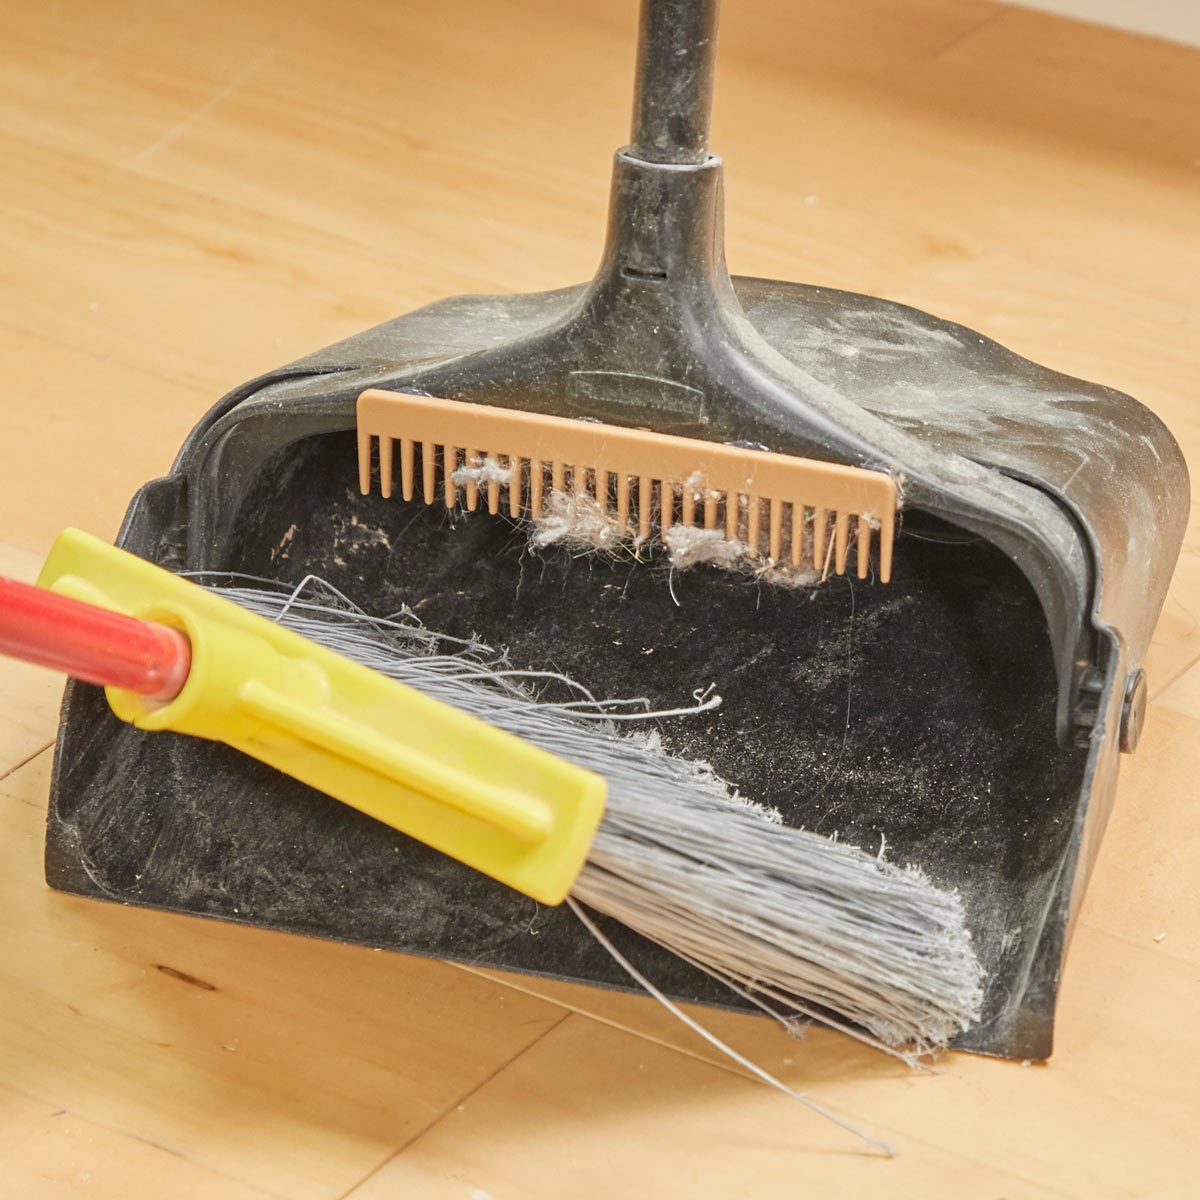 12 discounted tools that can help make spring cleaning a breeze